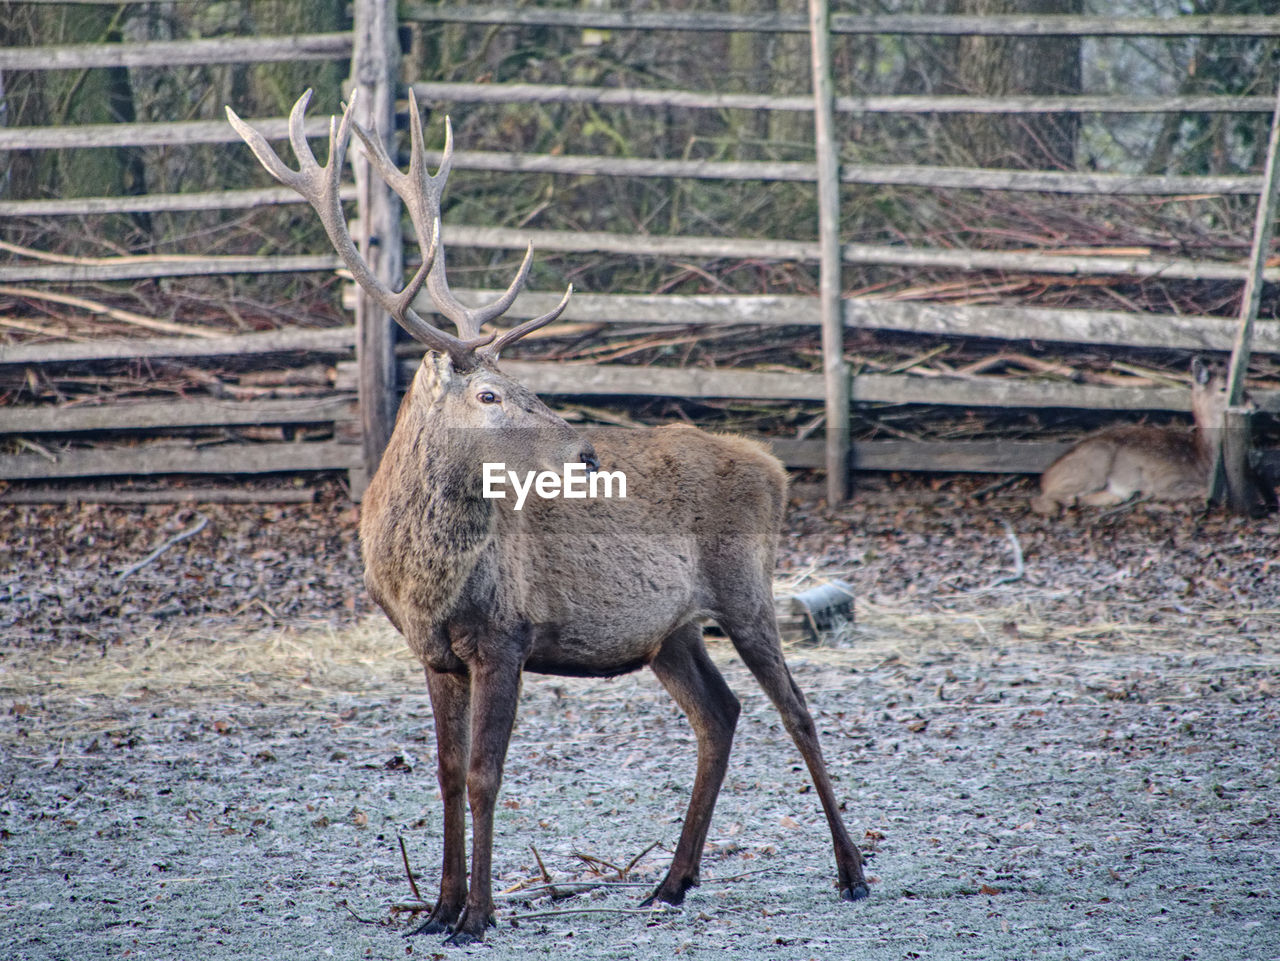 Red deer,cervus elaphus, at wooden fence in rutting season. hoarfrost on ground with fallen leaves.